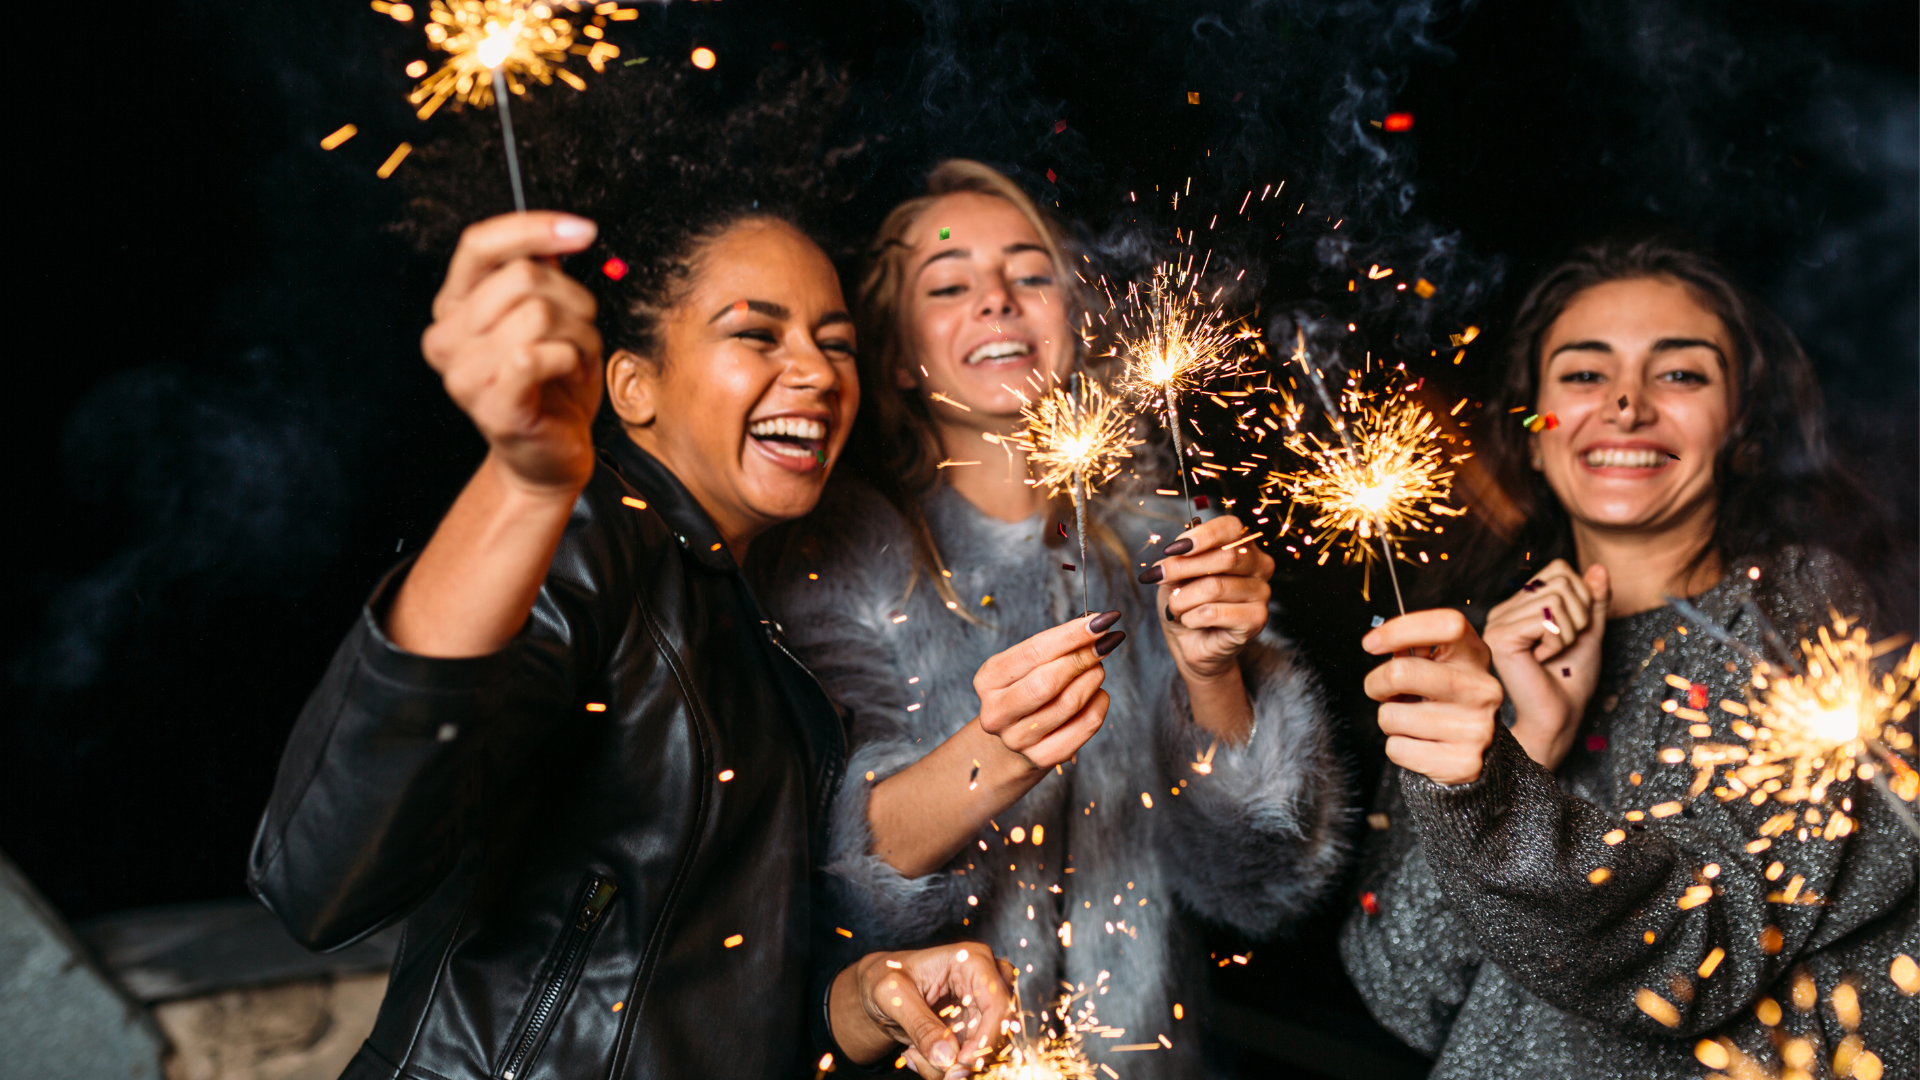 Three people celebrating at night with sparklers.